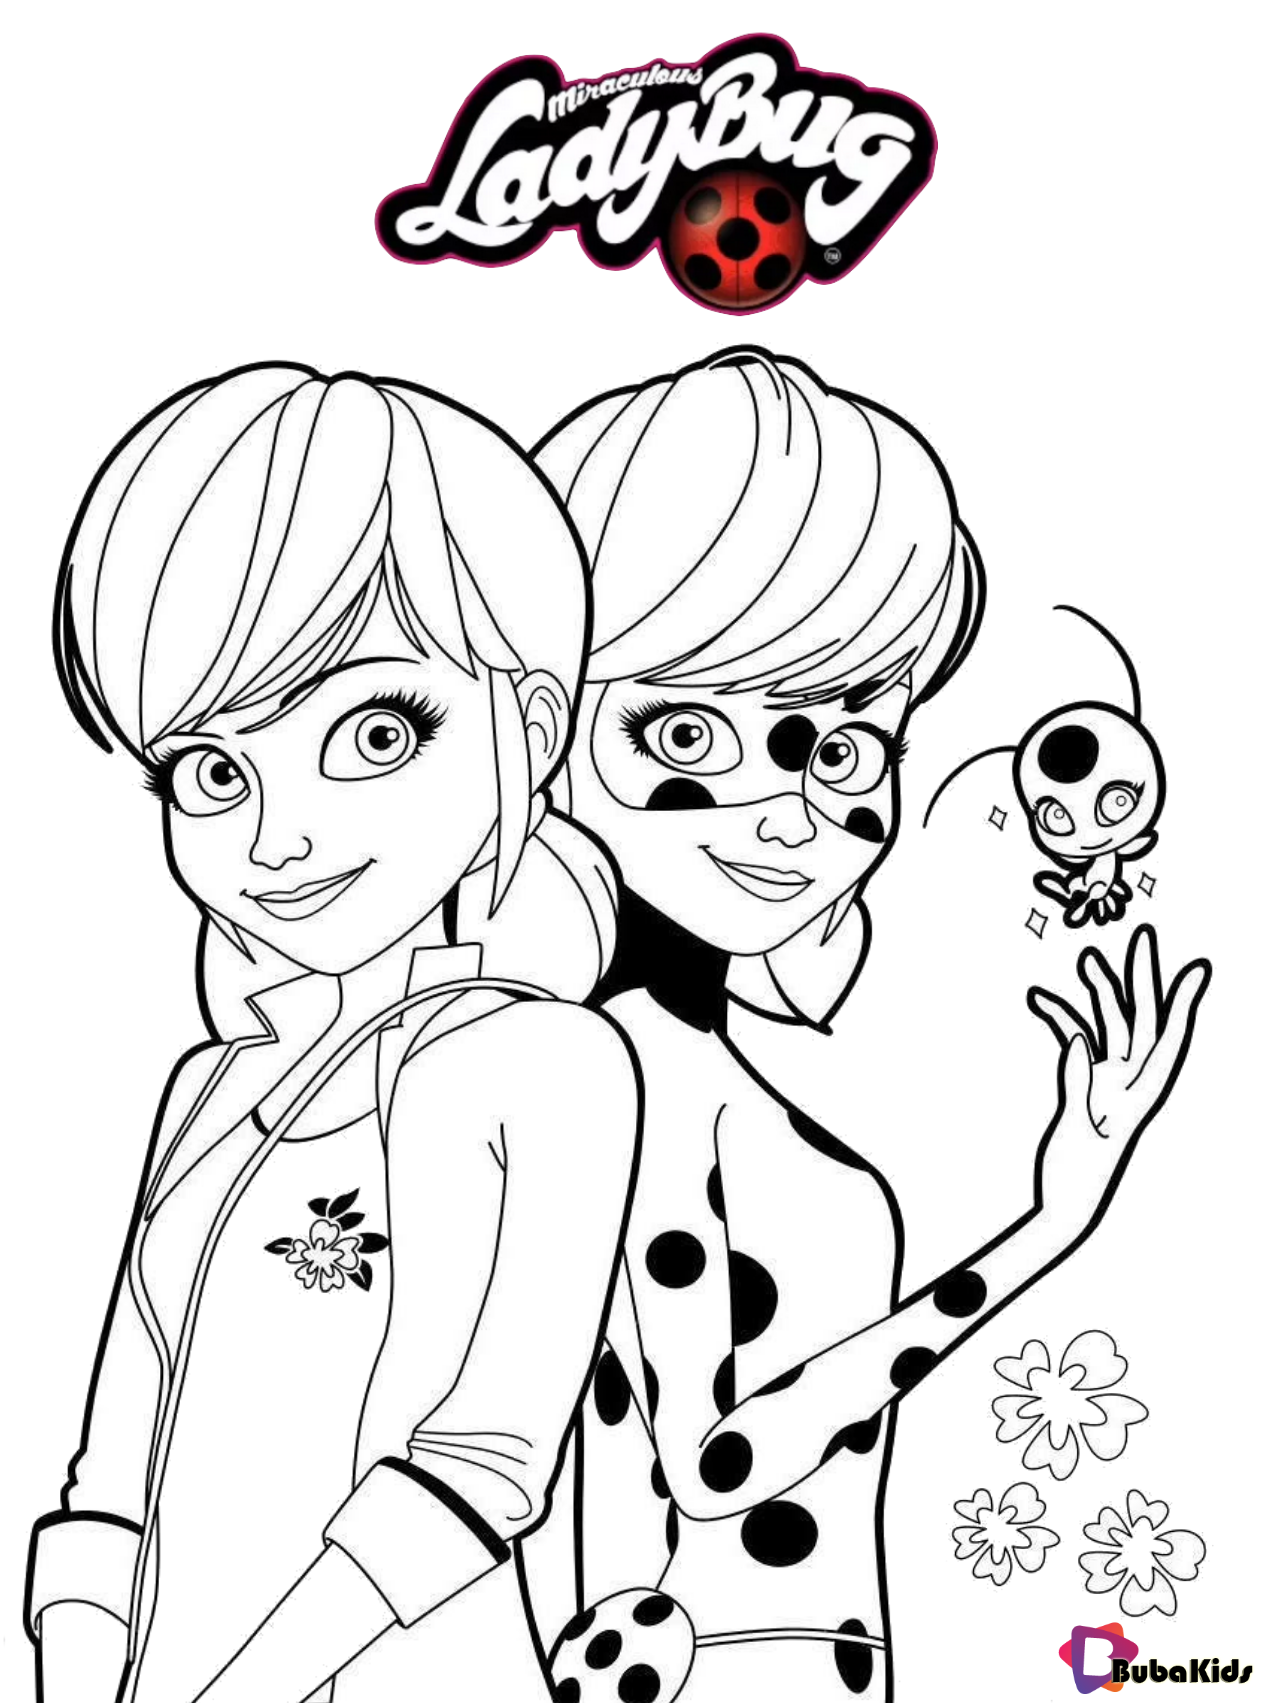 miraculous-ladybug-free-coloring-page-for-kids-bubakids